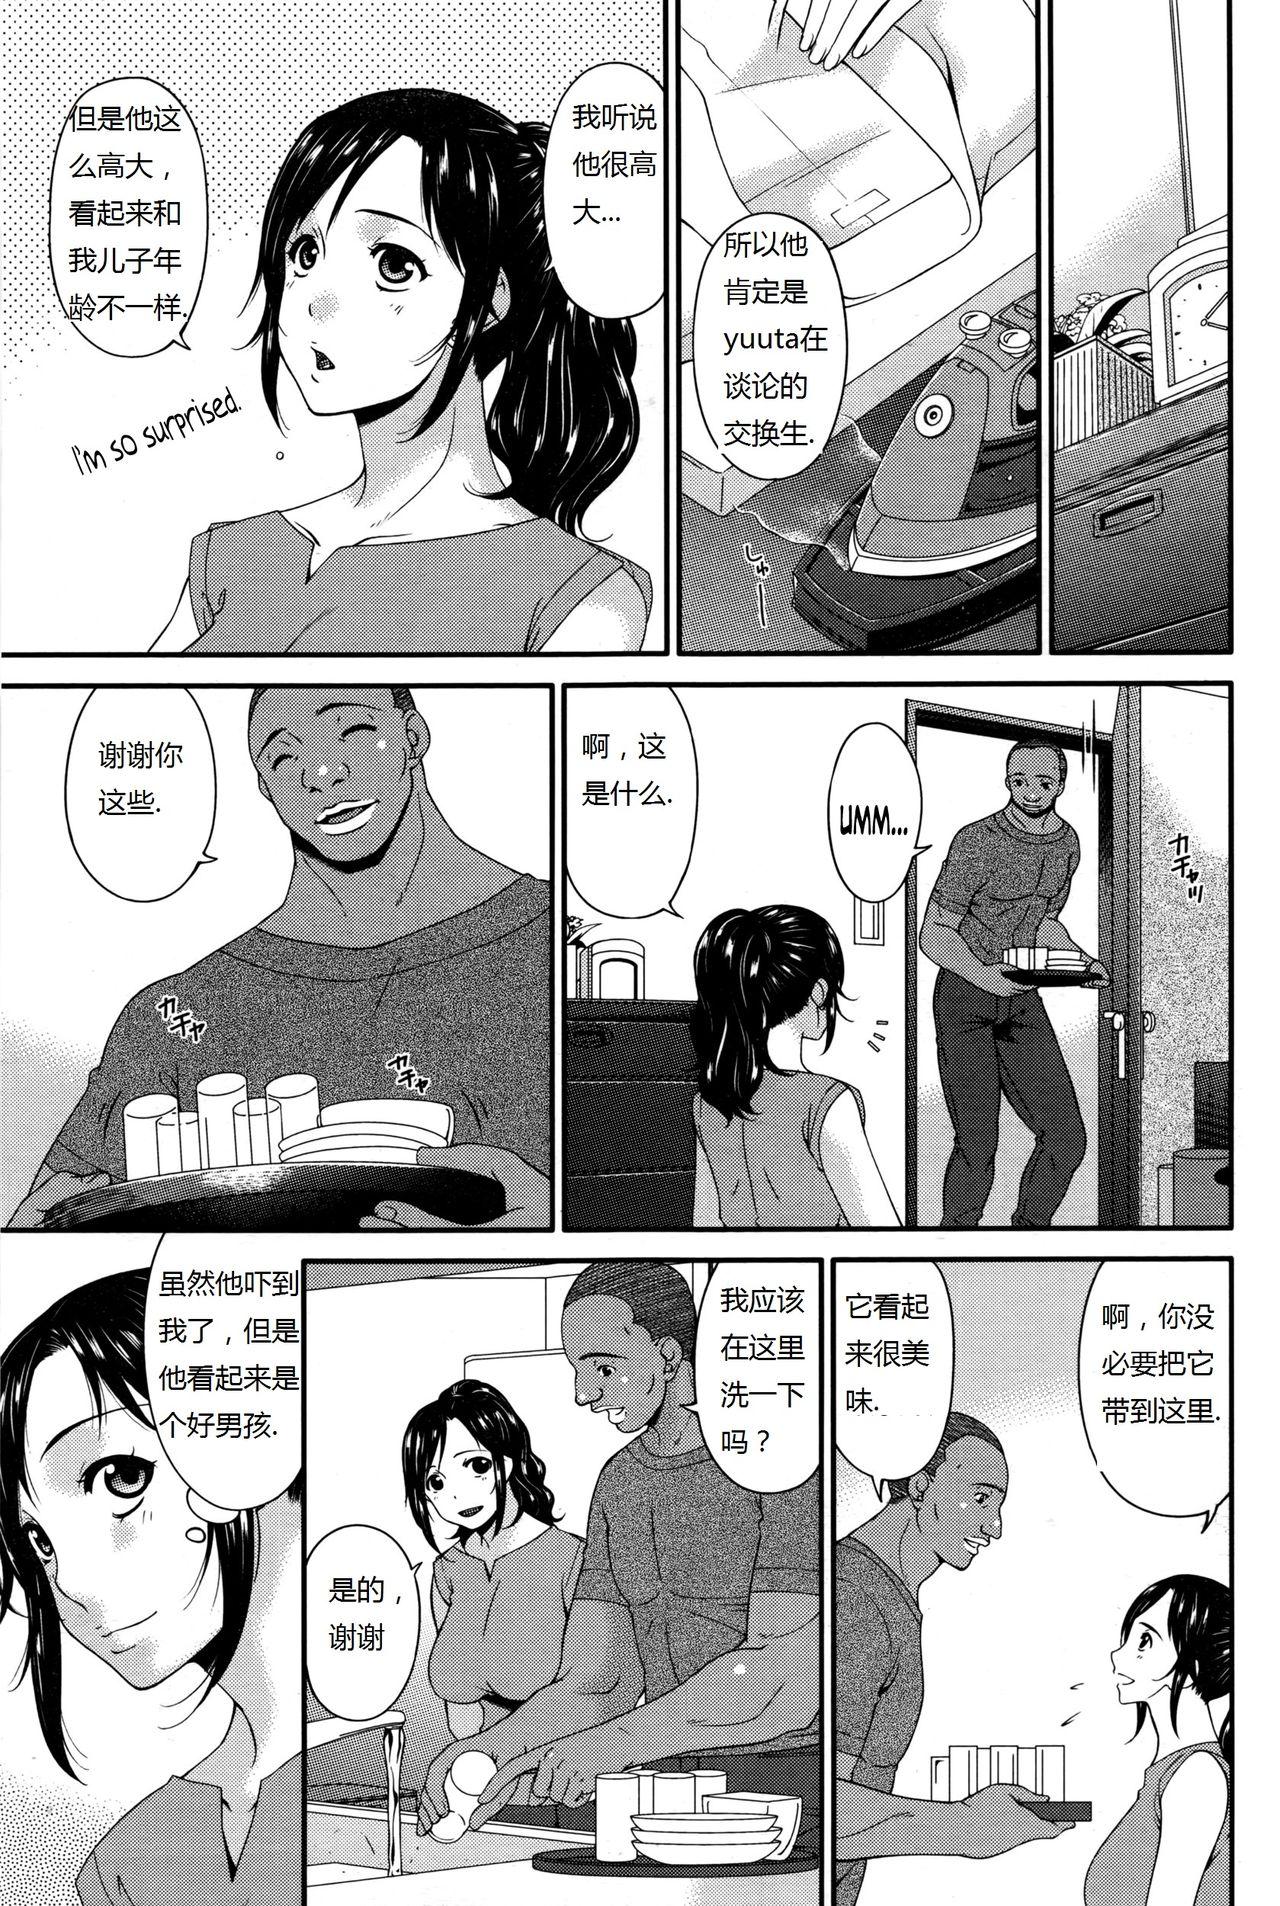 Spanking Youbo | Impregnated Mother Ch. 1-5 Com - Page 3